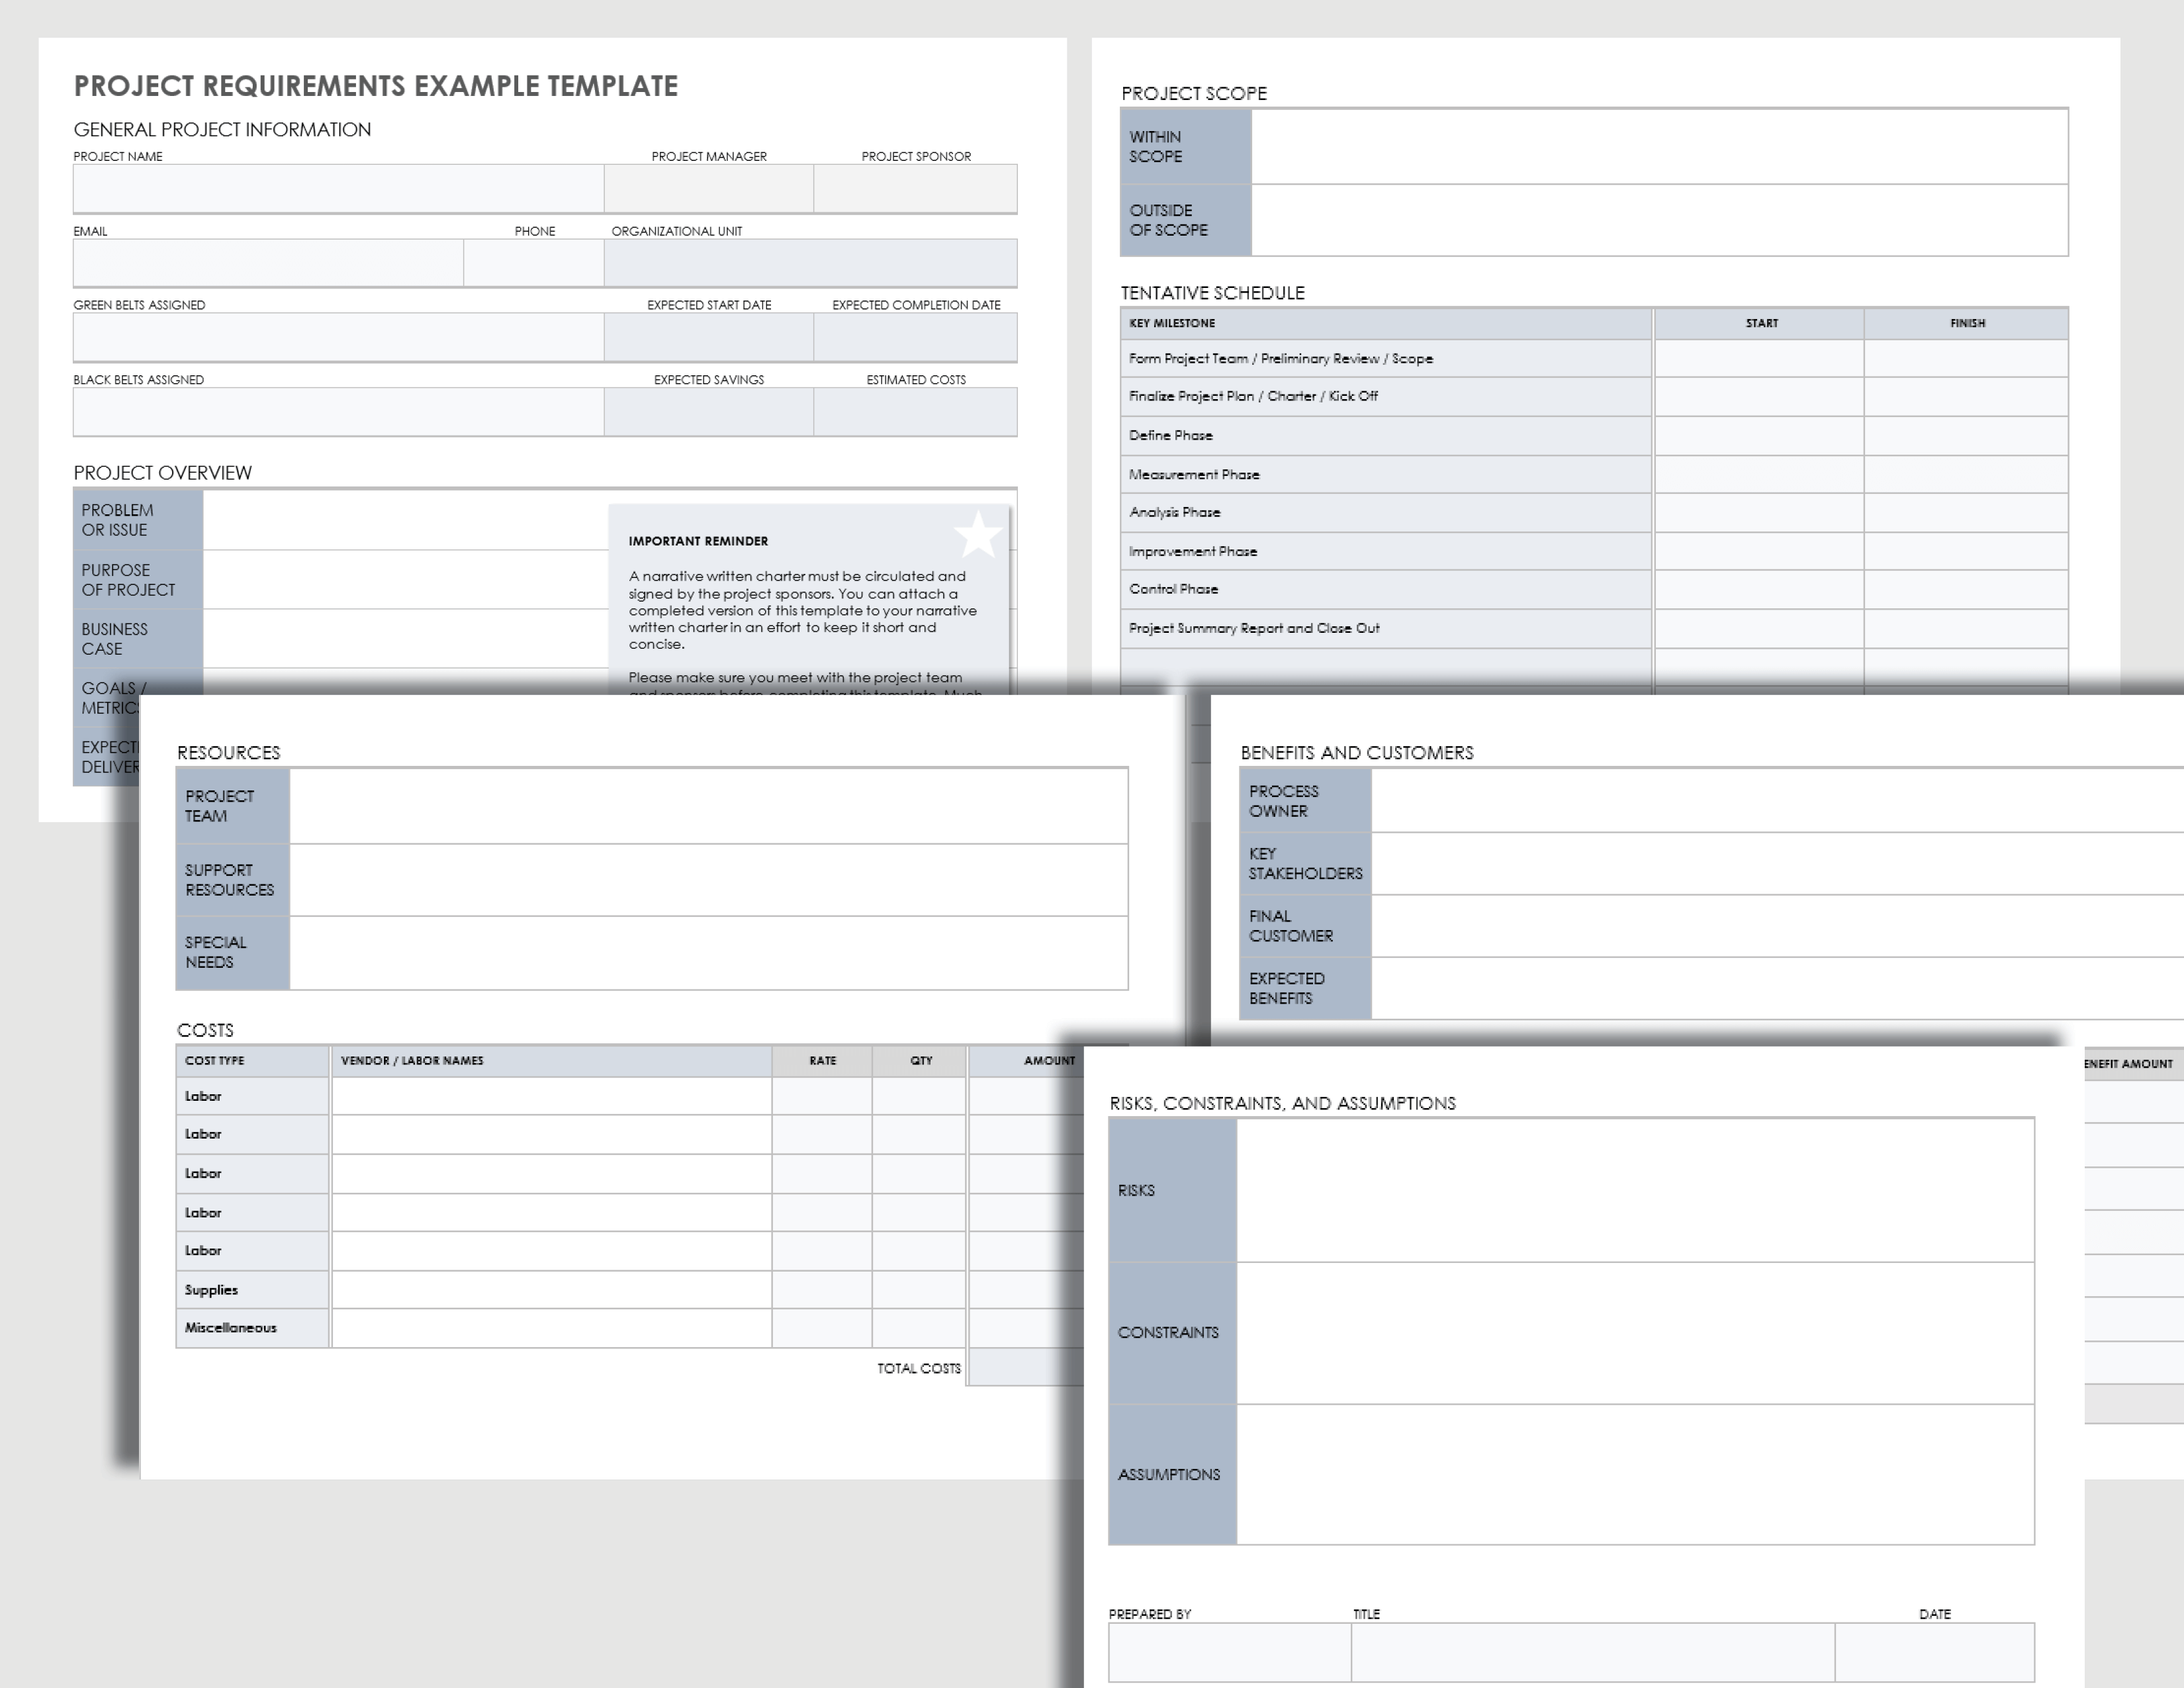 Project Requirements Example Template